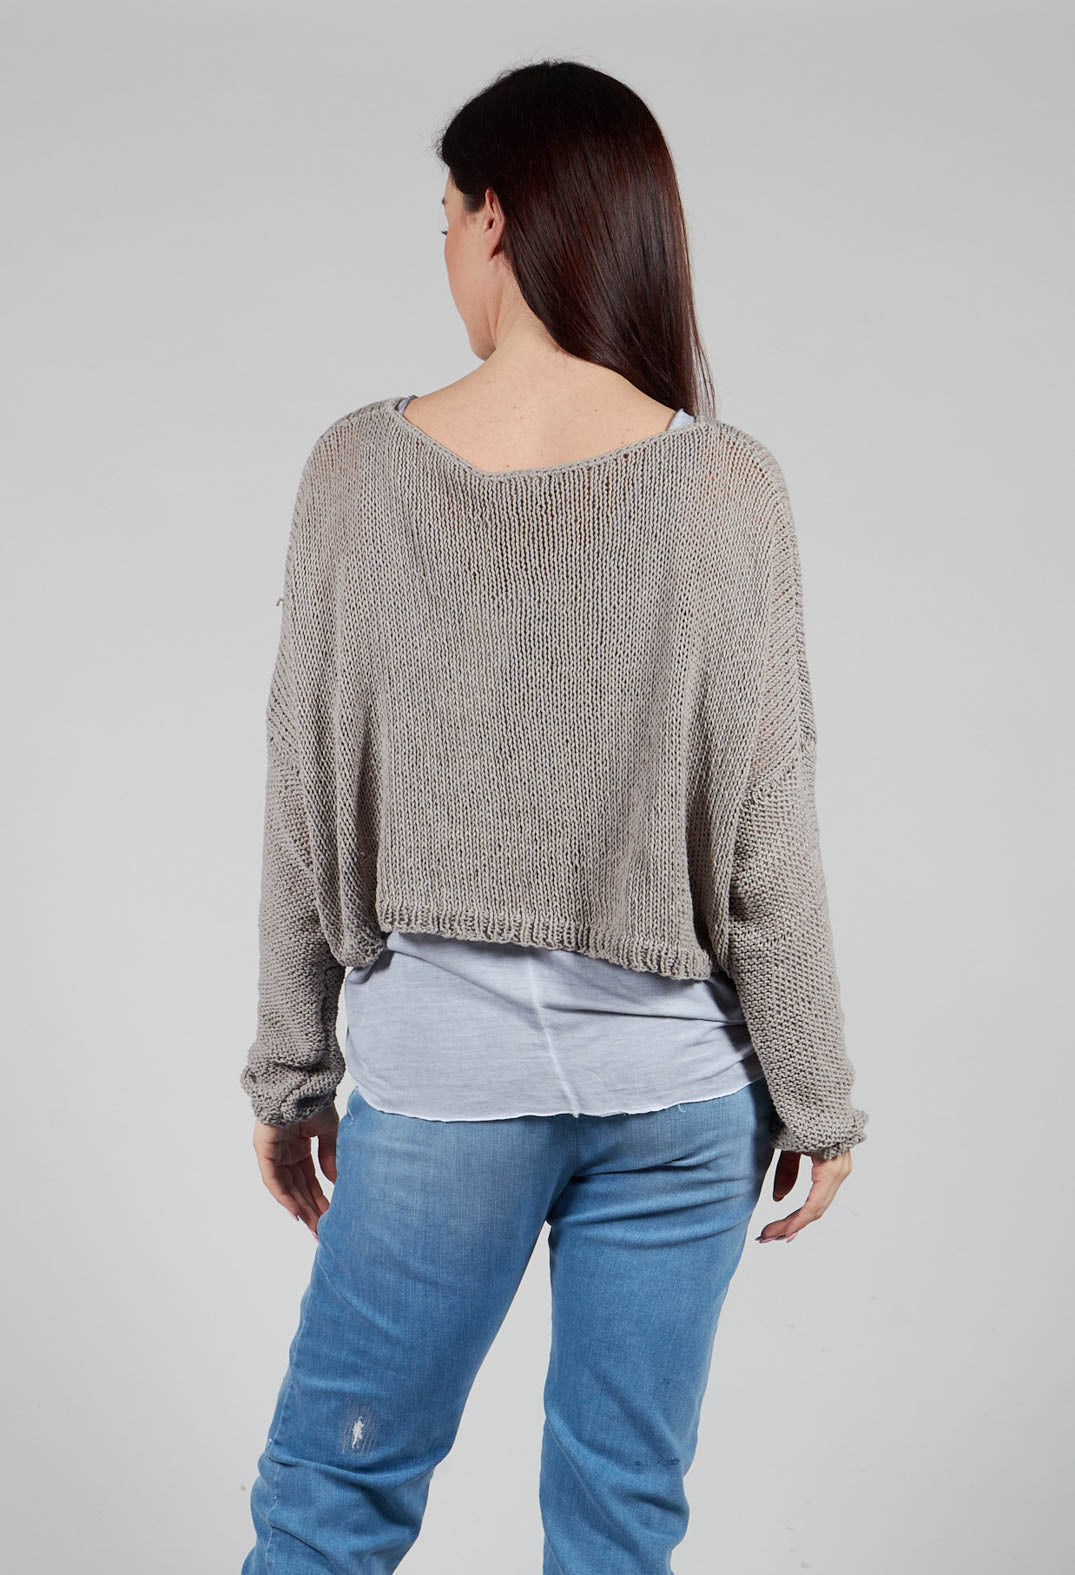 Cropped Hand Knitted Jumper in Light Khaki